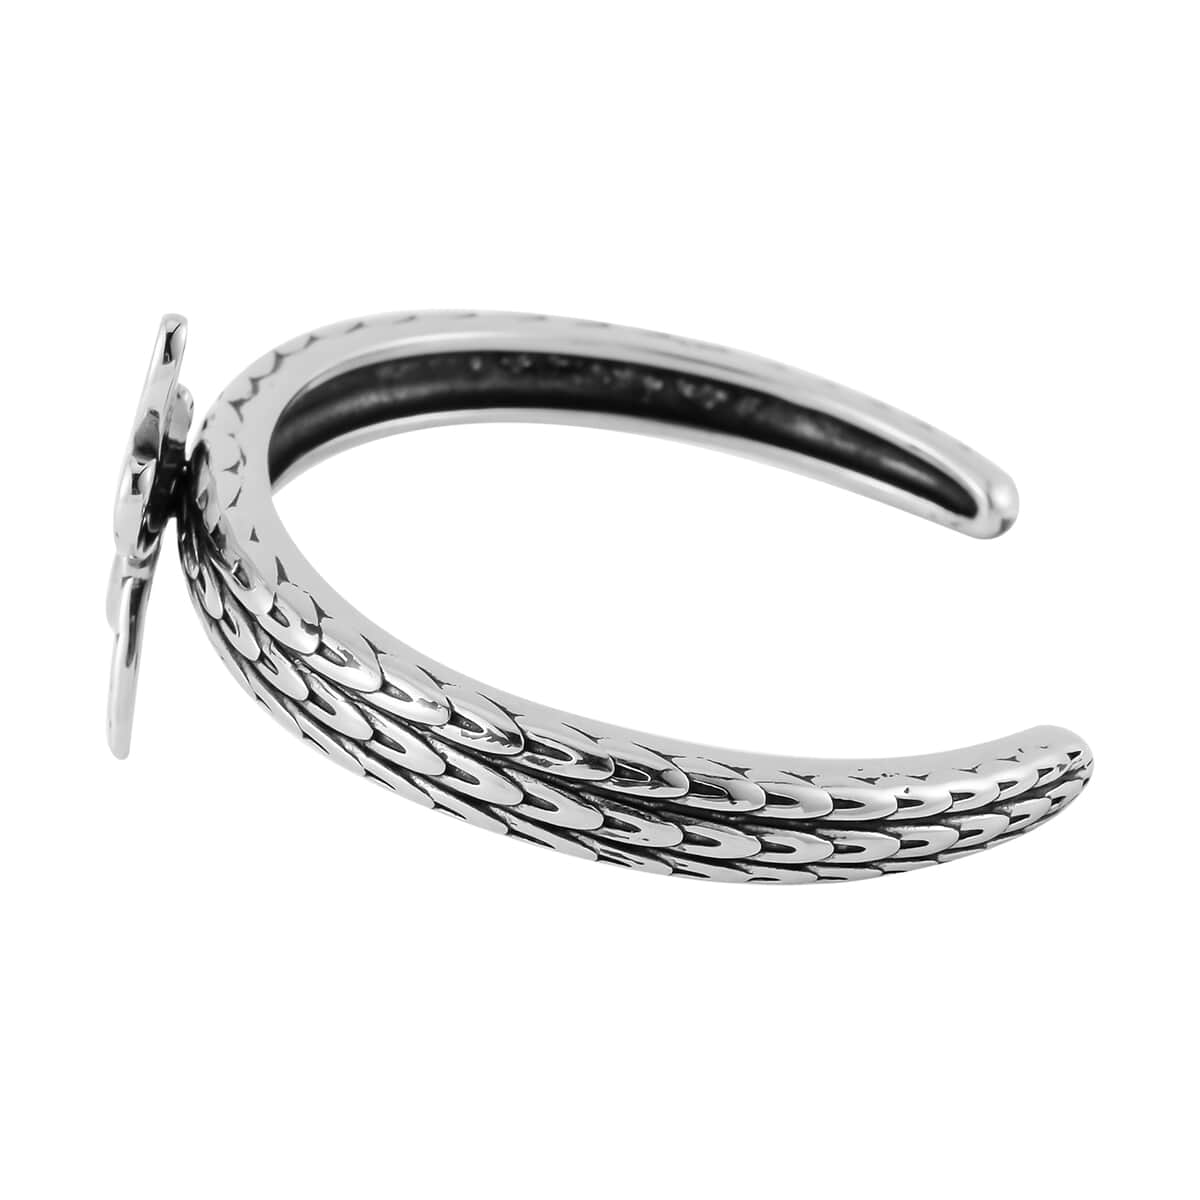 Abalone Shell Dragonfly Cuff Bracelet in Black Oxidized Stainless Steel (7.50 in) image number 2